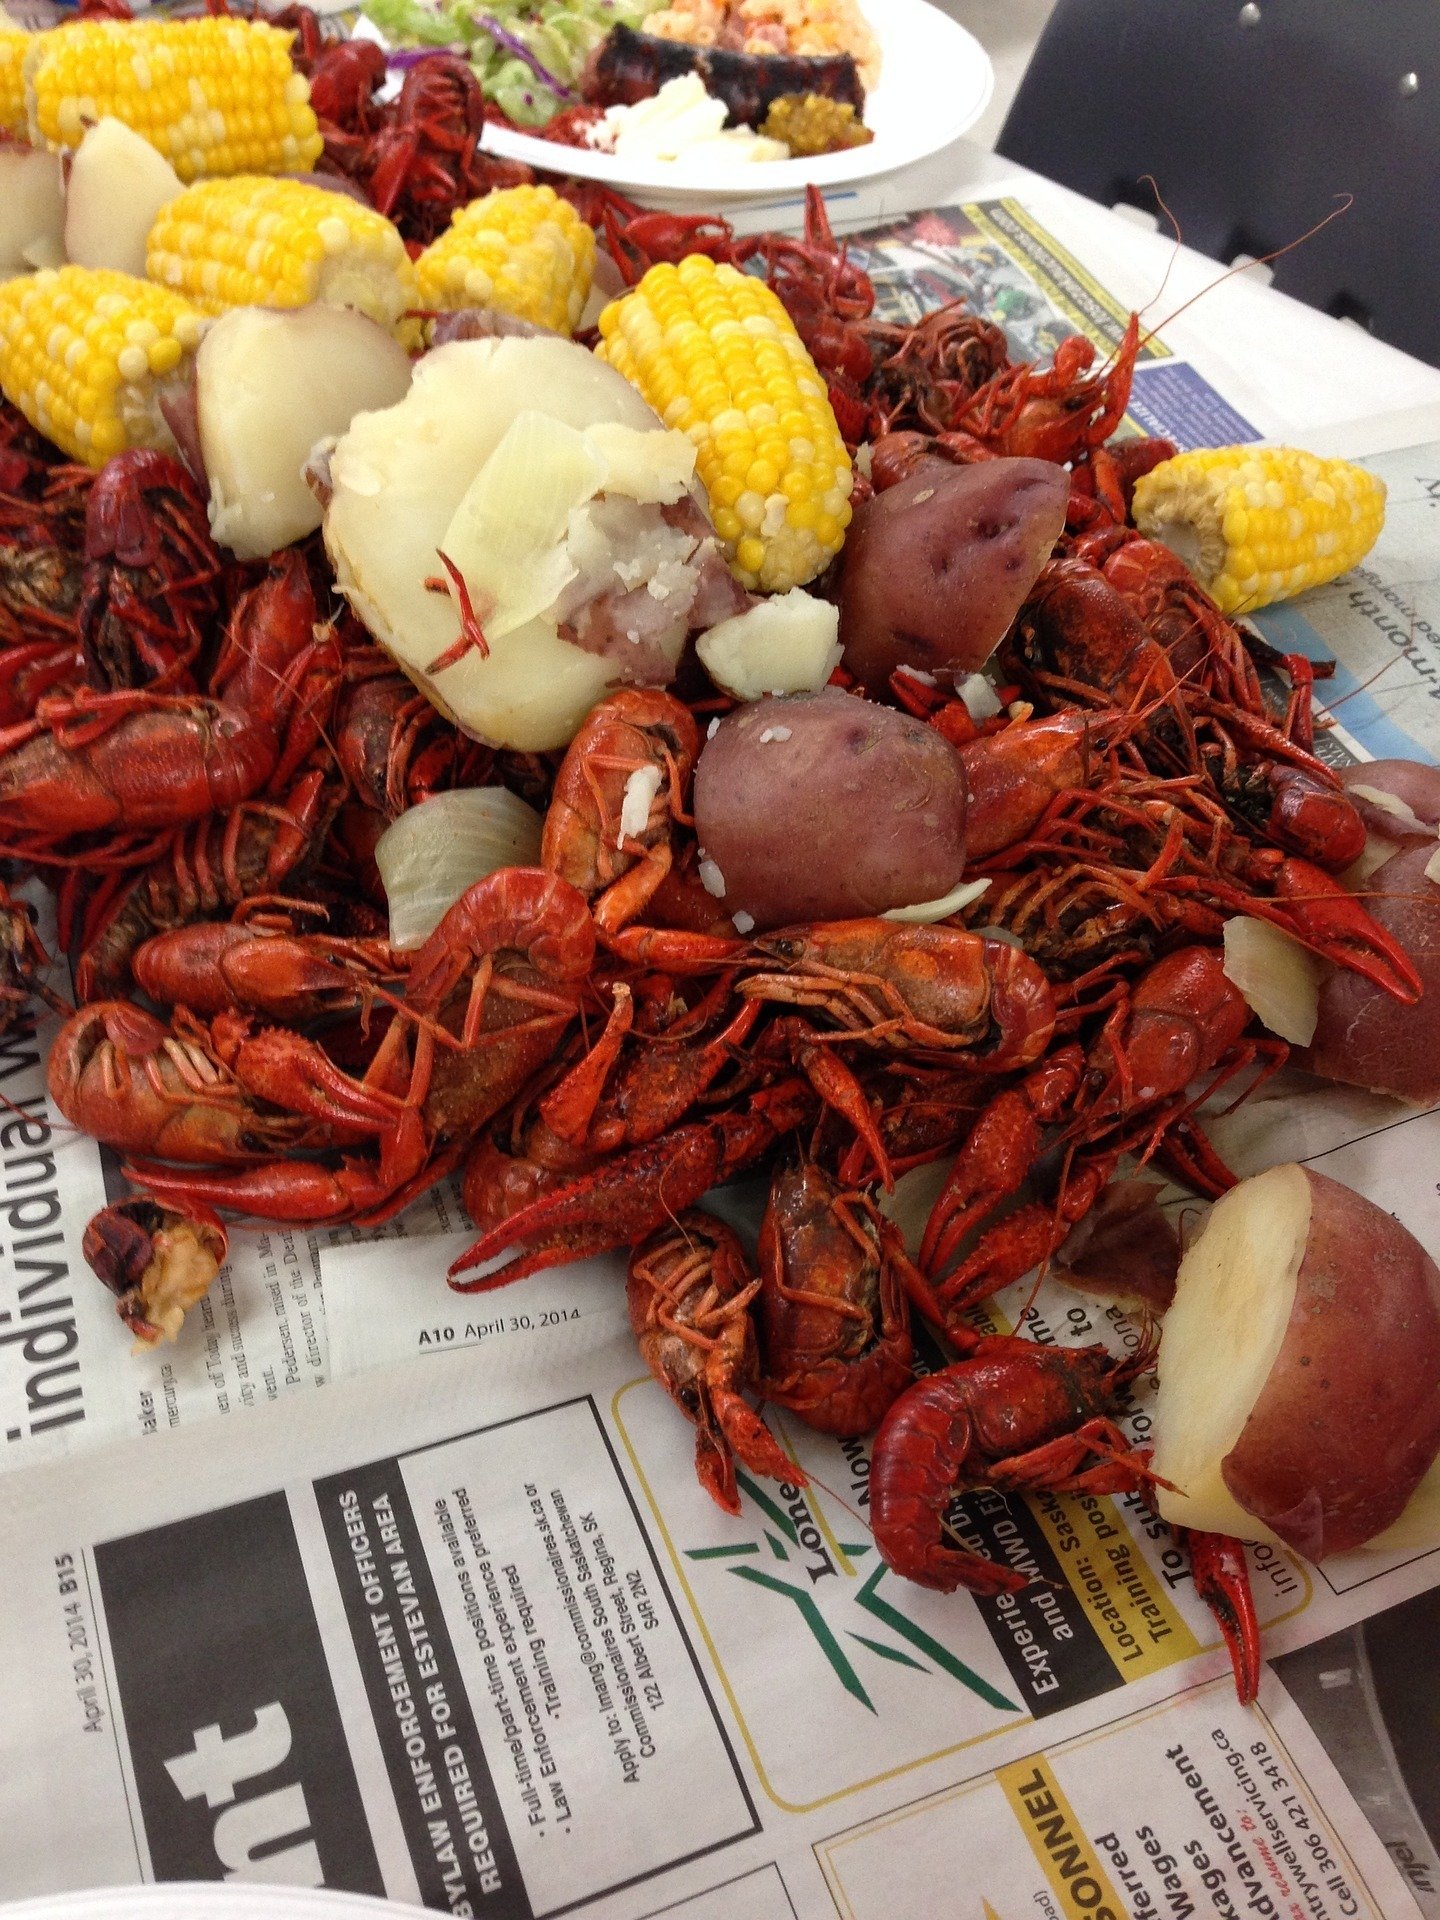 How To Make A Seafood Boil: Equipment, Supplies, Beer Pairing, & More!